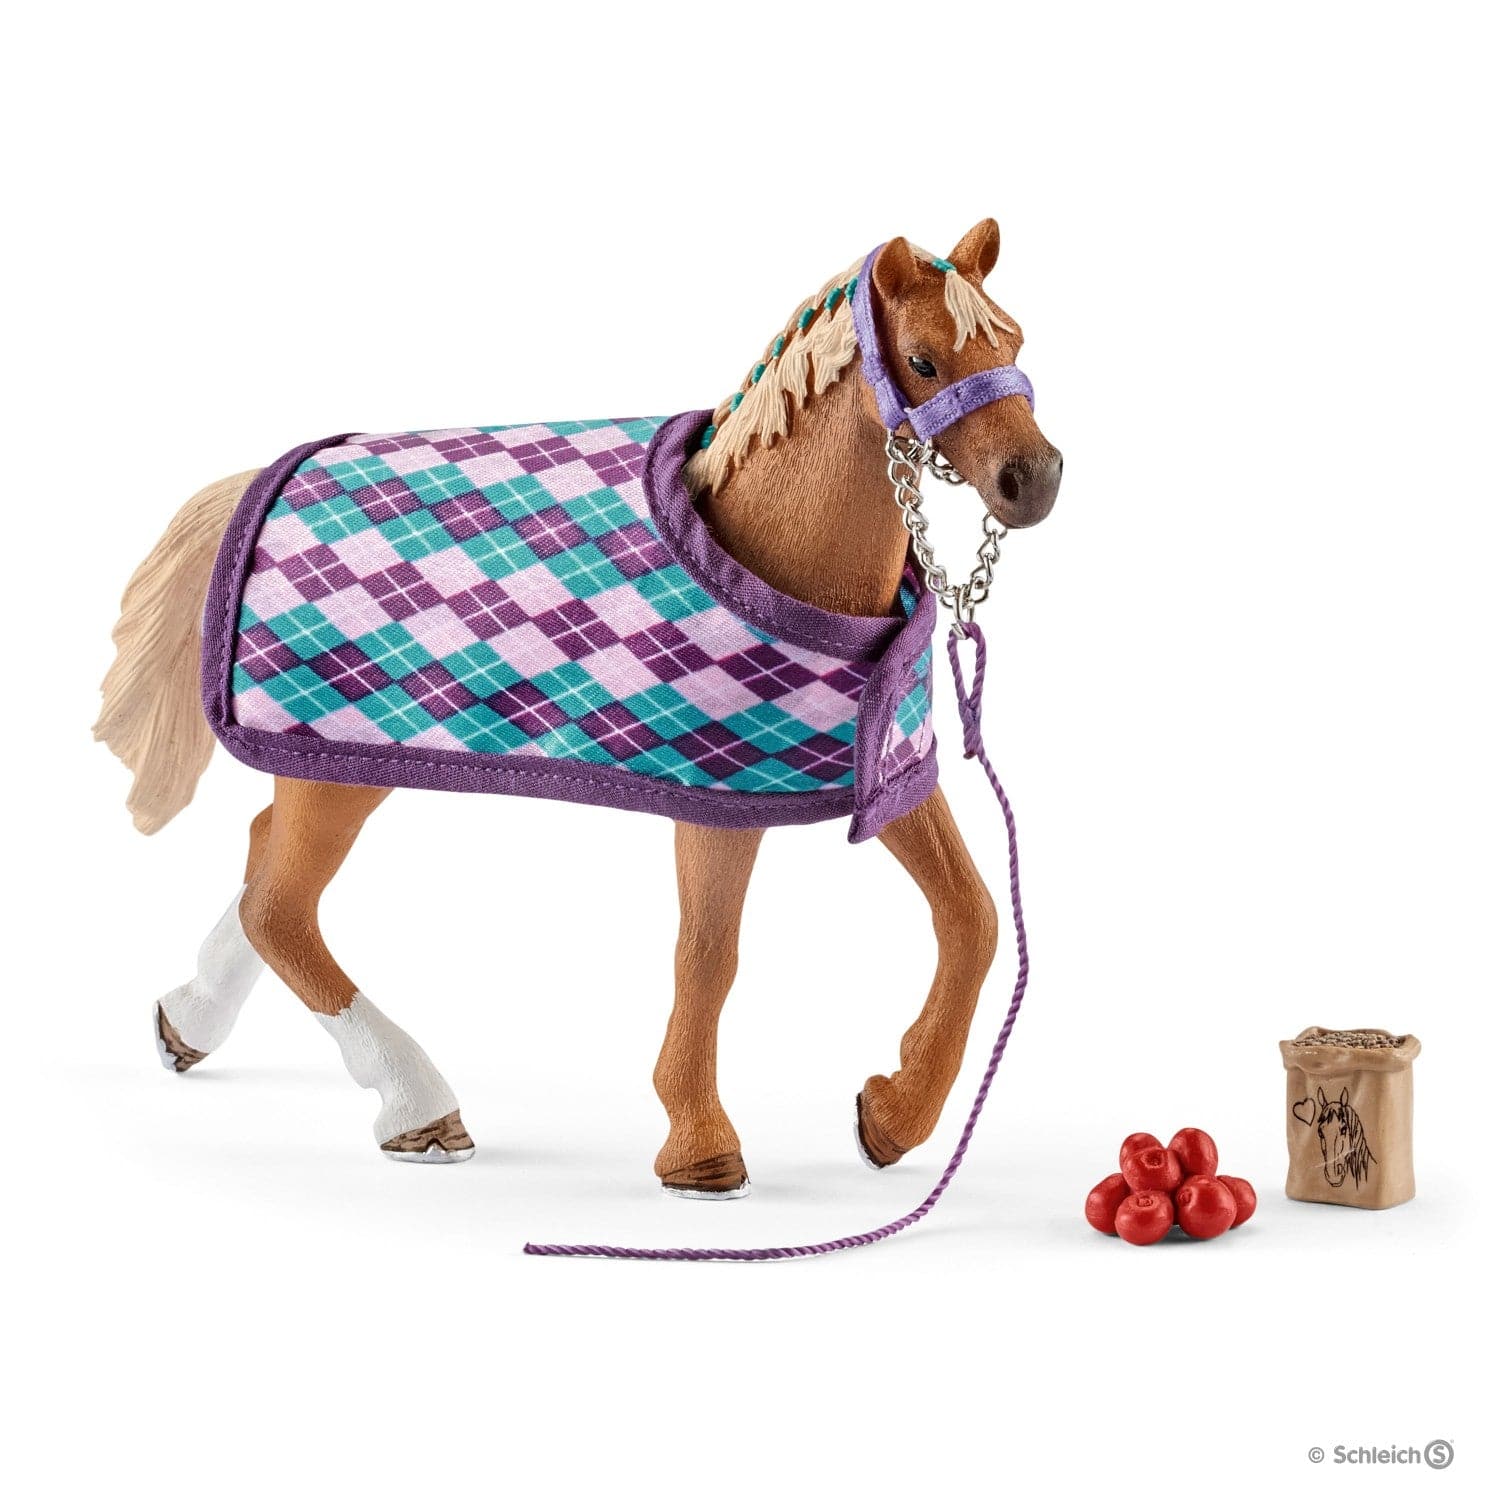 Schleich-English Thoroughbred with Blanket-42360-Legacy Toys